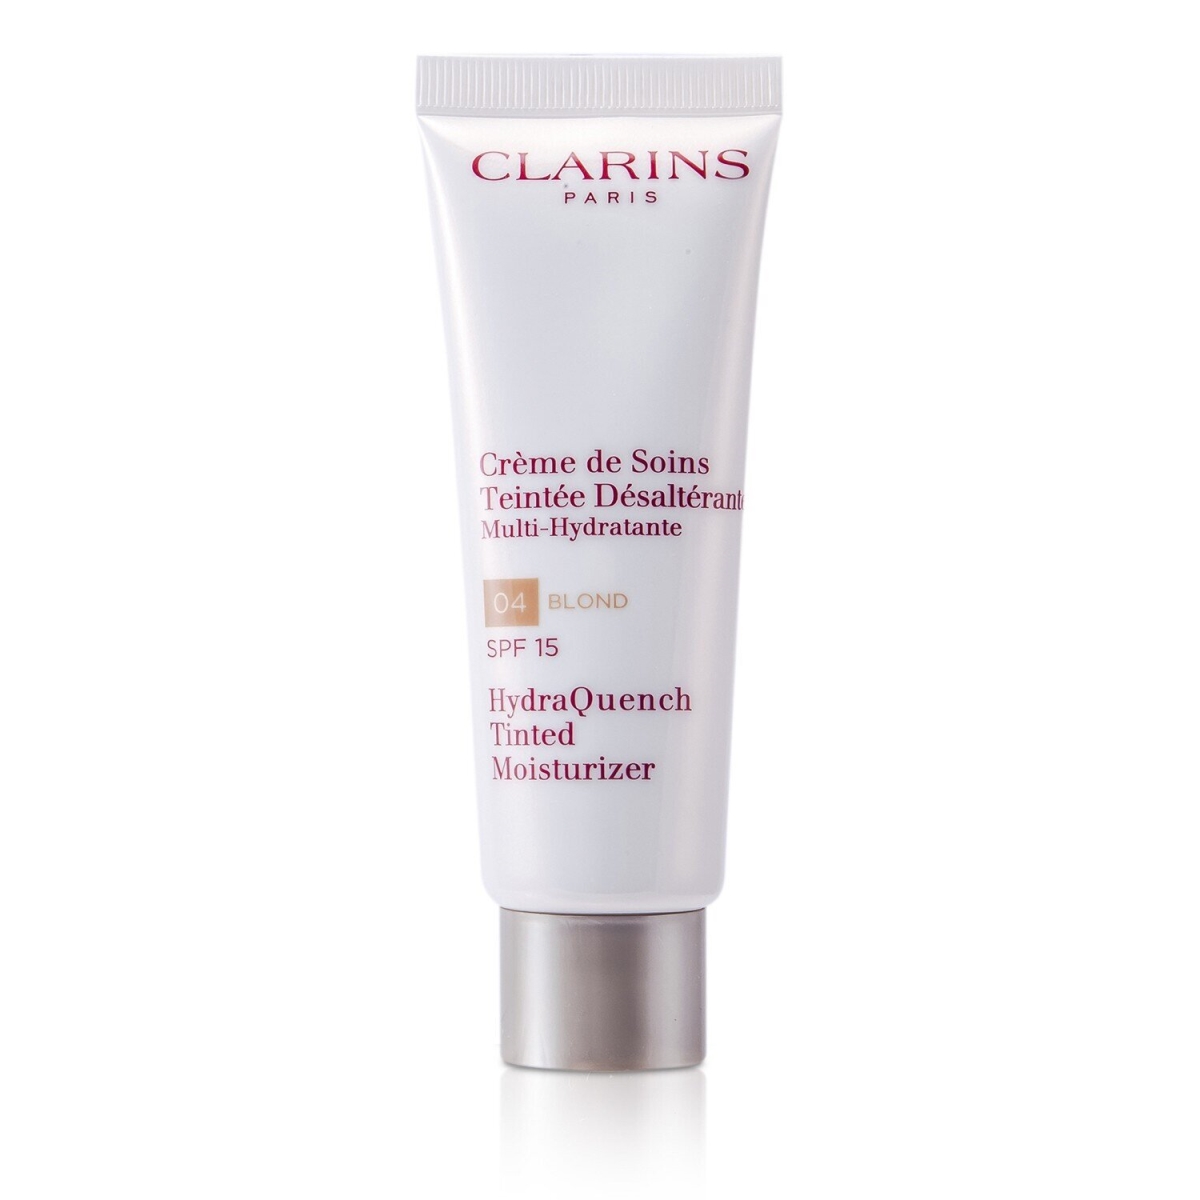 Picture of Clarins 170348 1.8 oz HydraQuench Tinted Moisturizer SPF 15 - No.04 Blond